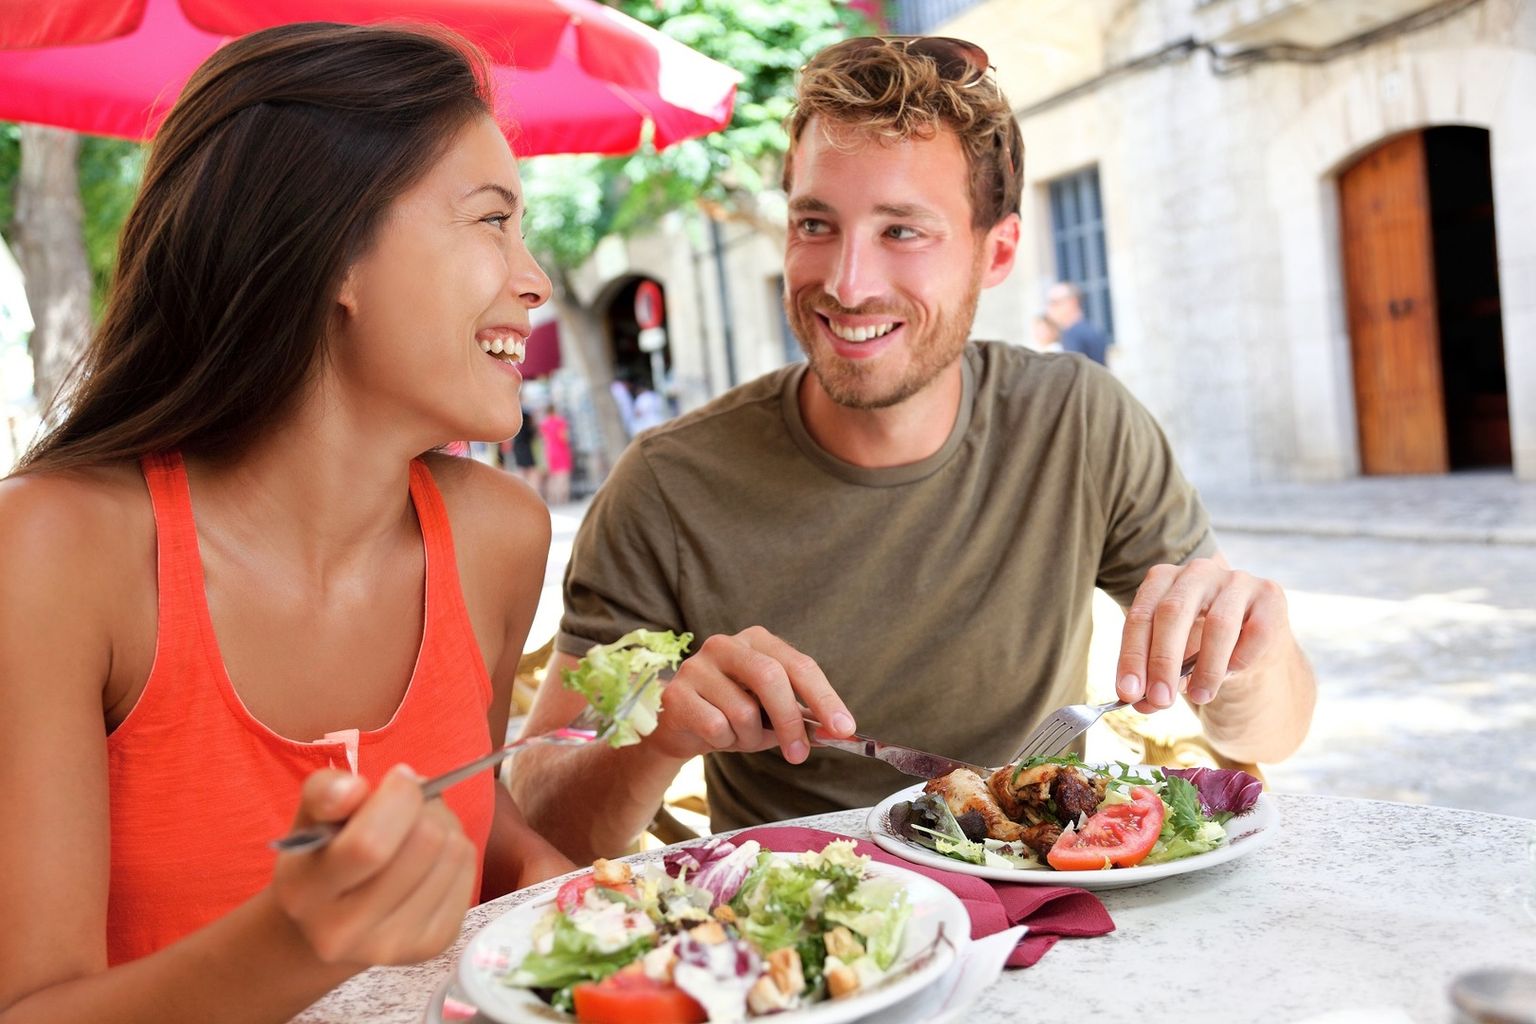 Two people eating in a restaurant and smiling at each other.